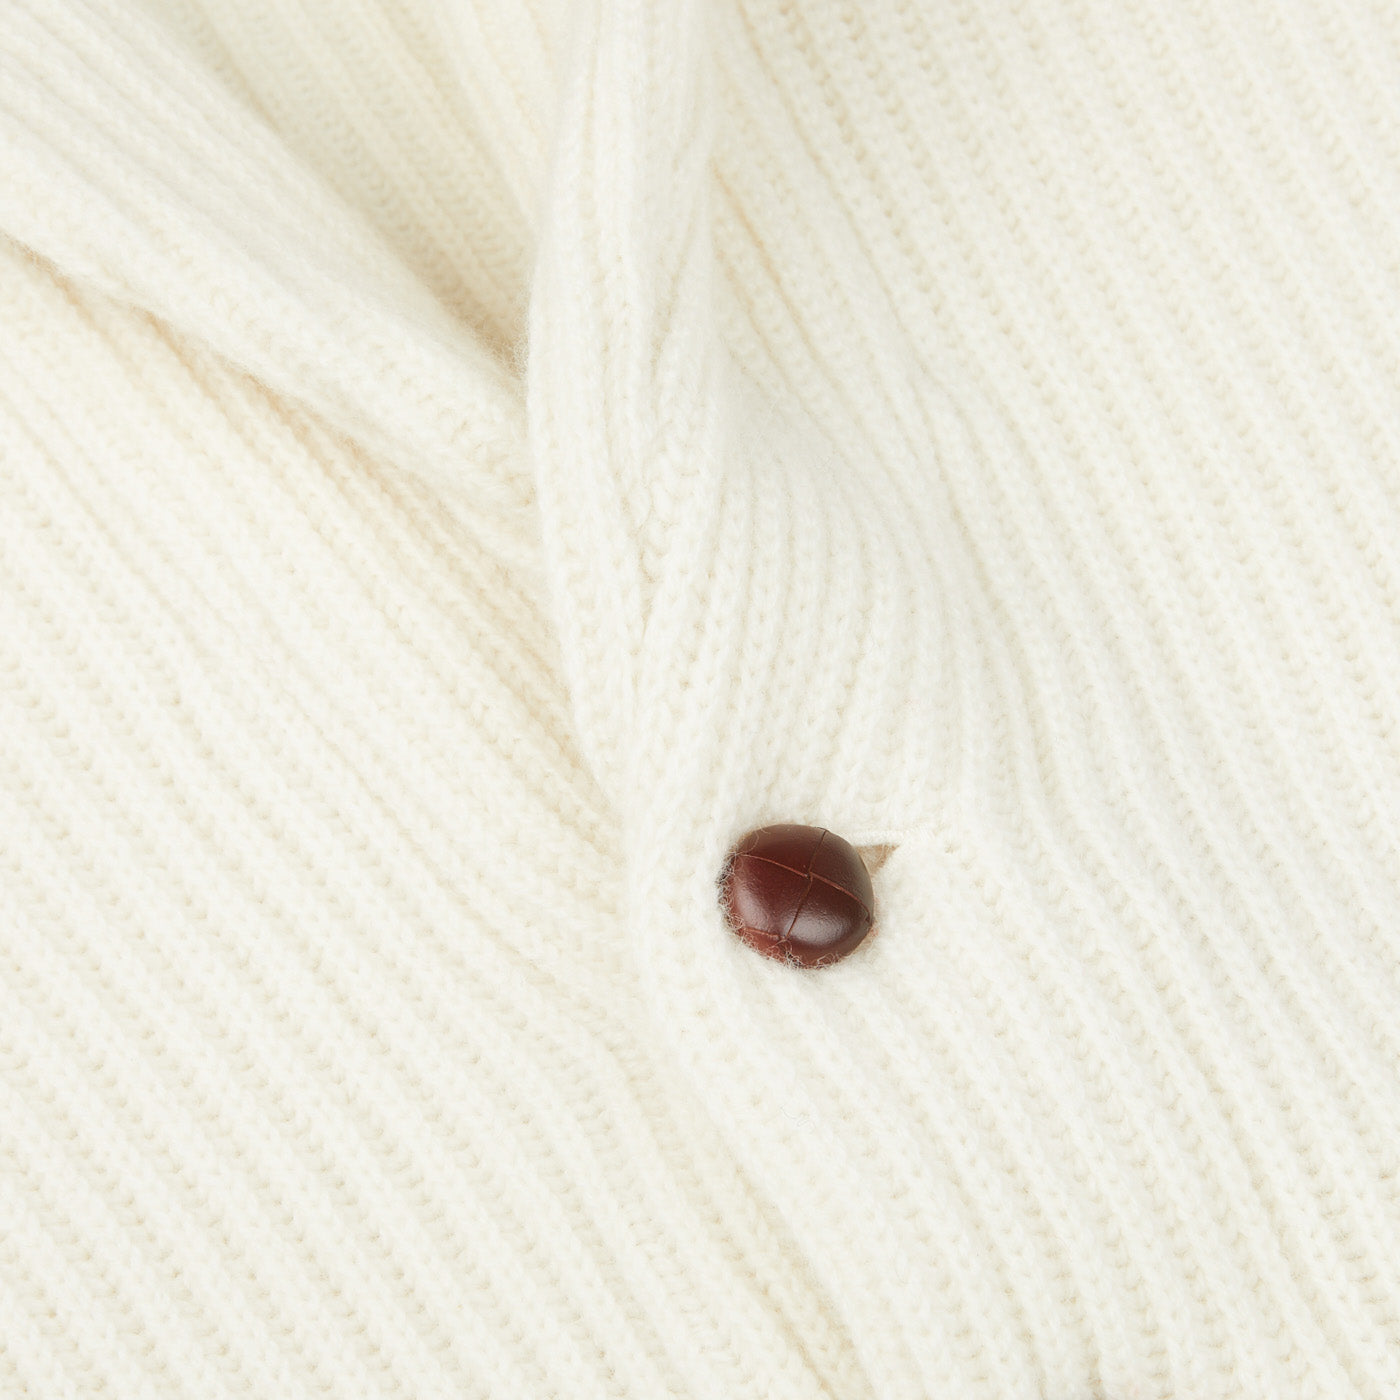 A close up of a Scottish William Lockie Ecru Beige Lambswool Shawl Collar Cardigan with a brown button.